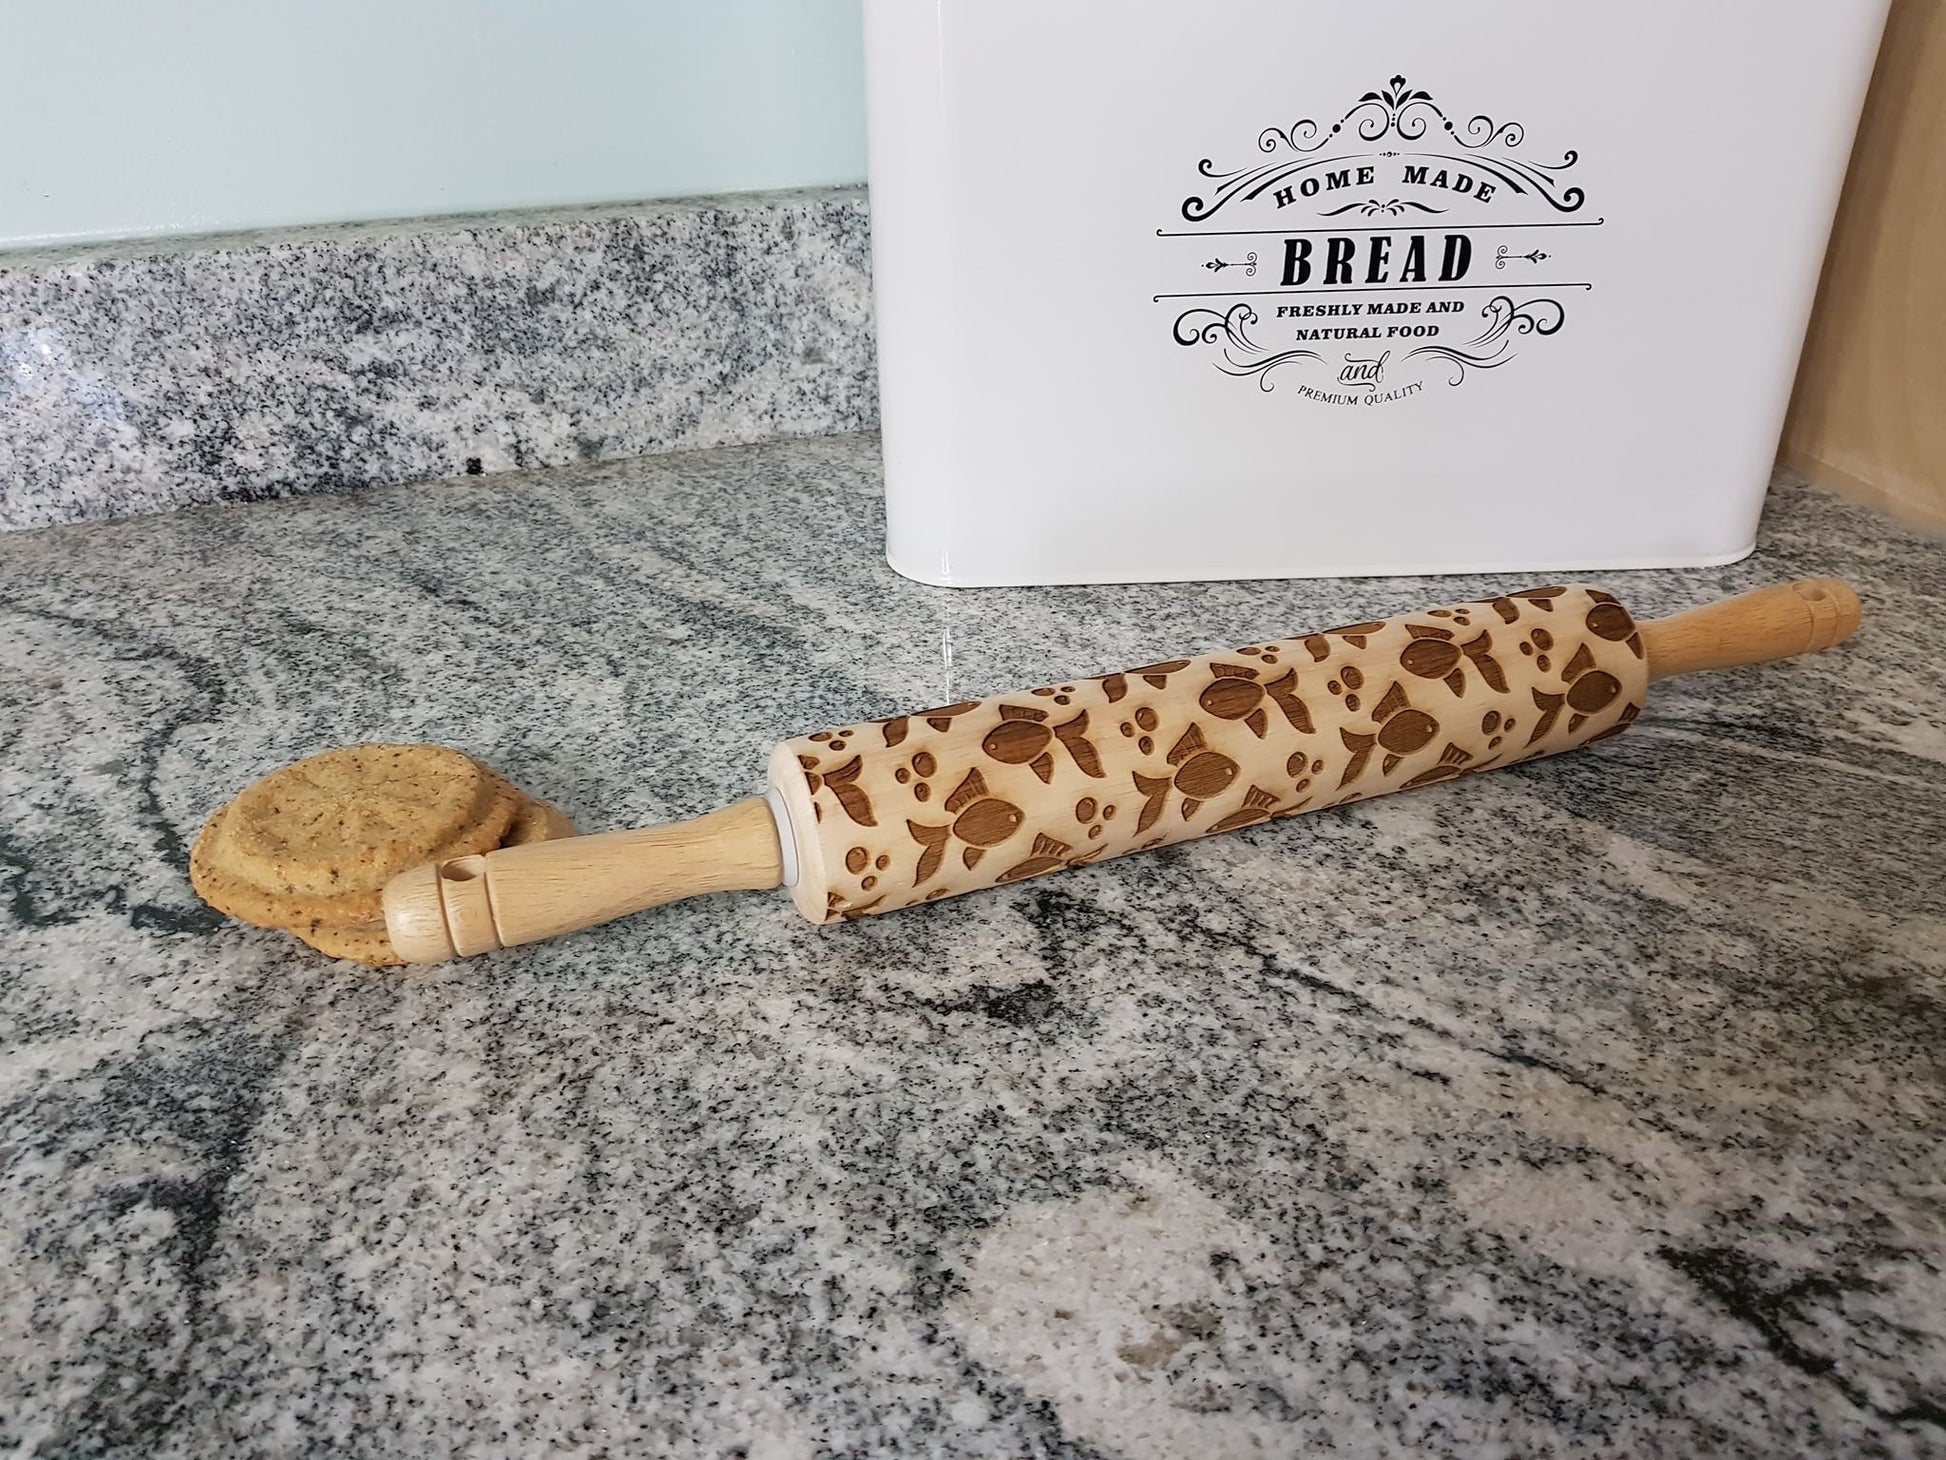 Fish, Gold Fish, Tropical, Texture, Embossed, Engraved, Wooden Rolling Pin, Cookie Stamp, Laser, Hardwood 10 inch, Pattern, pottery